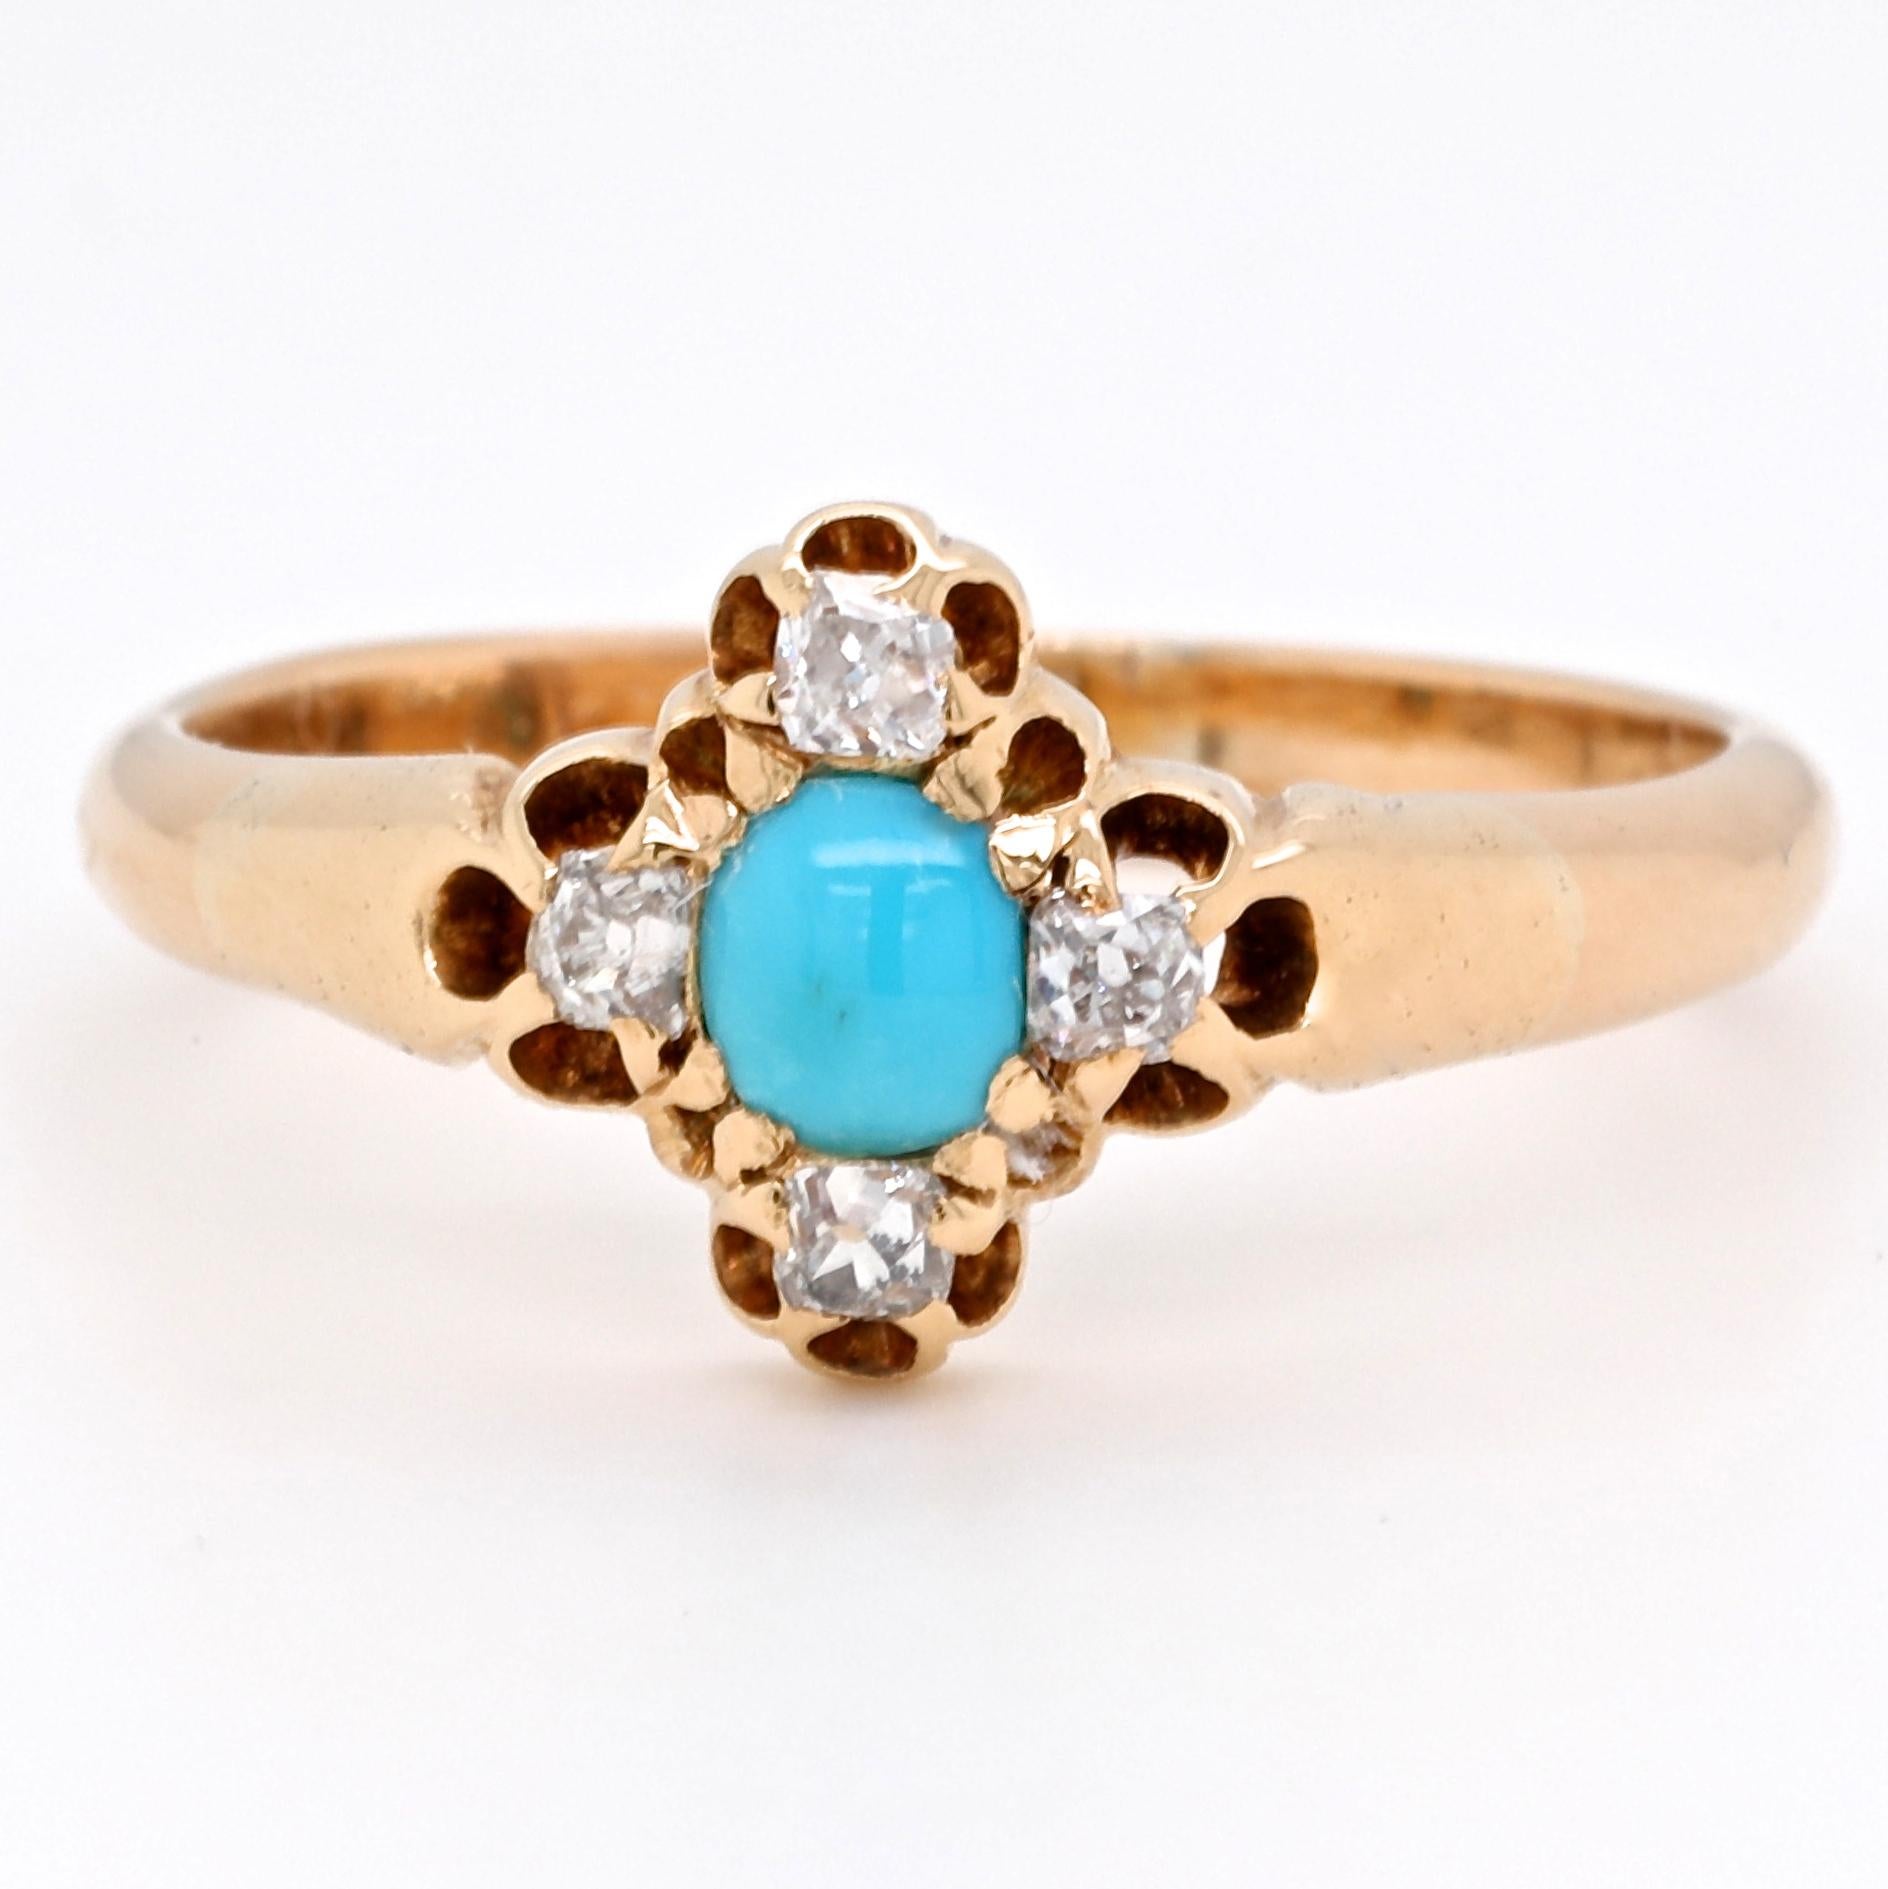 Yellow gold and teal blue Turquoise could be winning combination for you. Feel yourself like an Egyptian goddess wearing this eye-catching ring. The Victorian Revival Turquoise Diamond 14k Gold Ring will be a great addition to your antique jewelry